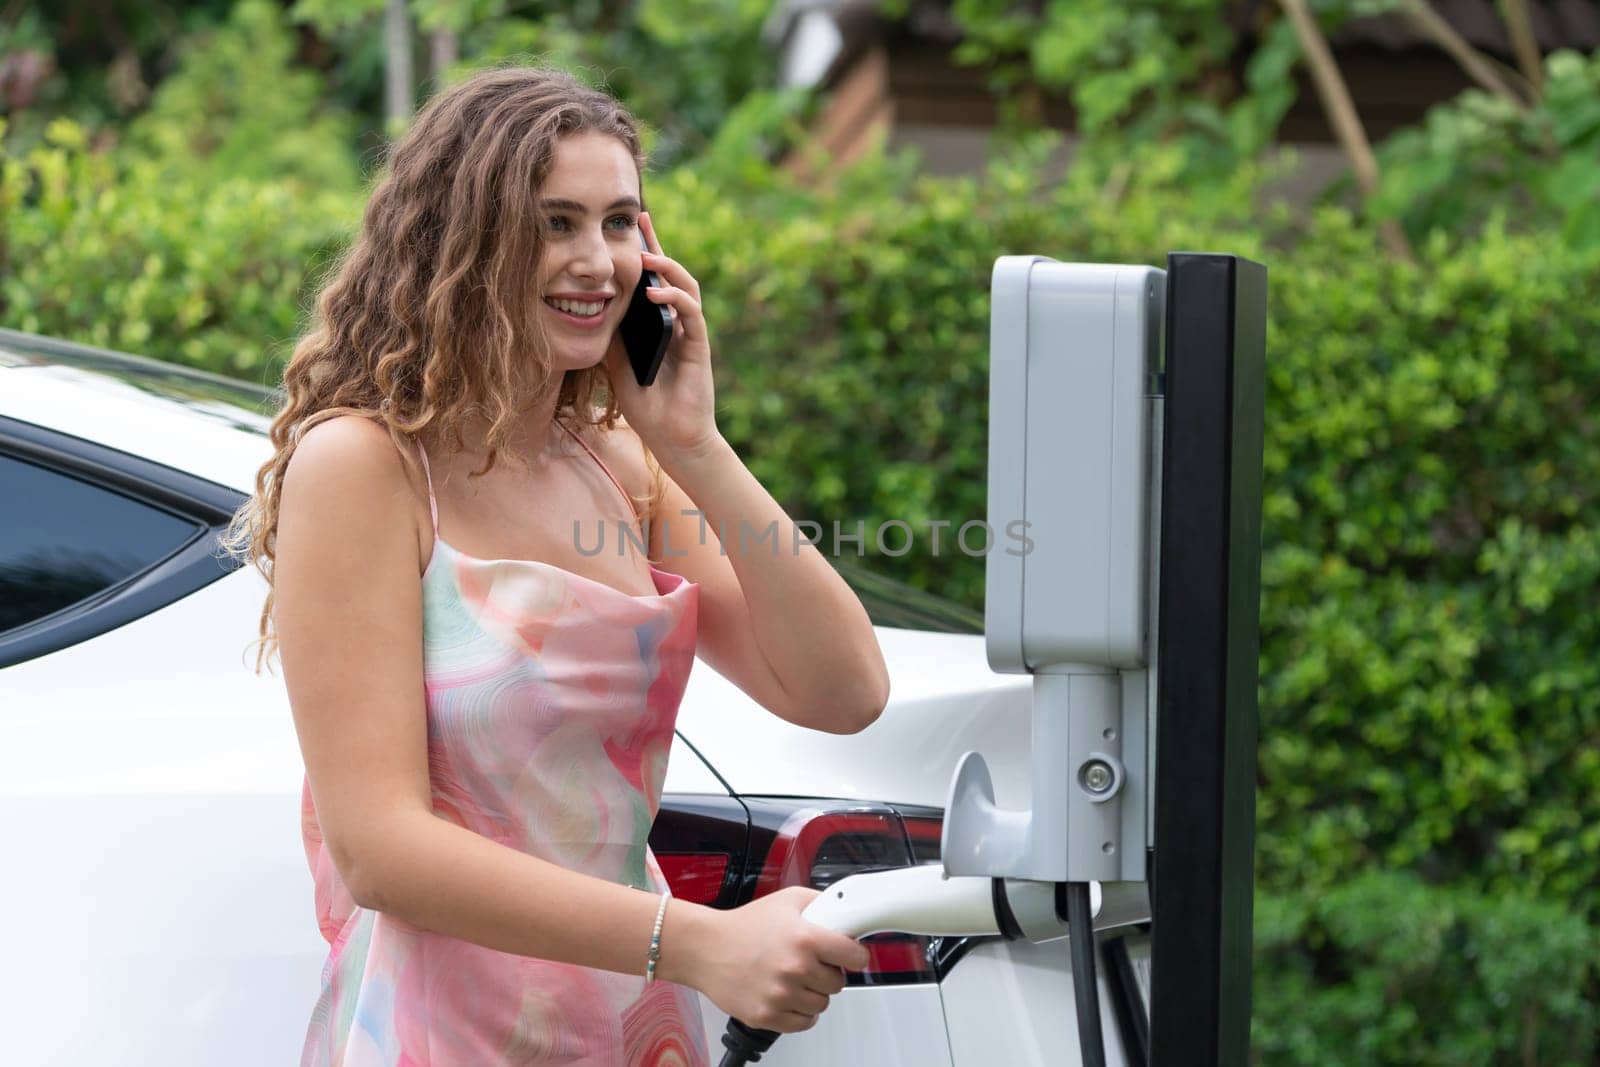 Modern eco-friendly woman recharging electric vehicle from home EV charging station. Innovative EV technology utilization for tracking energy usage to optimize battery charging at home. Synchronos